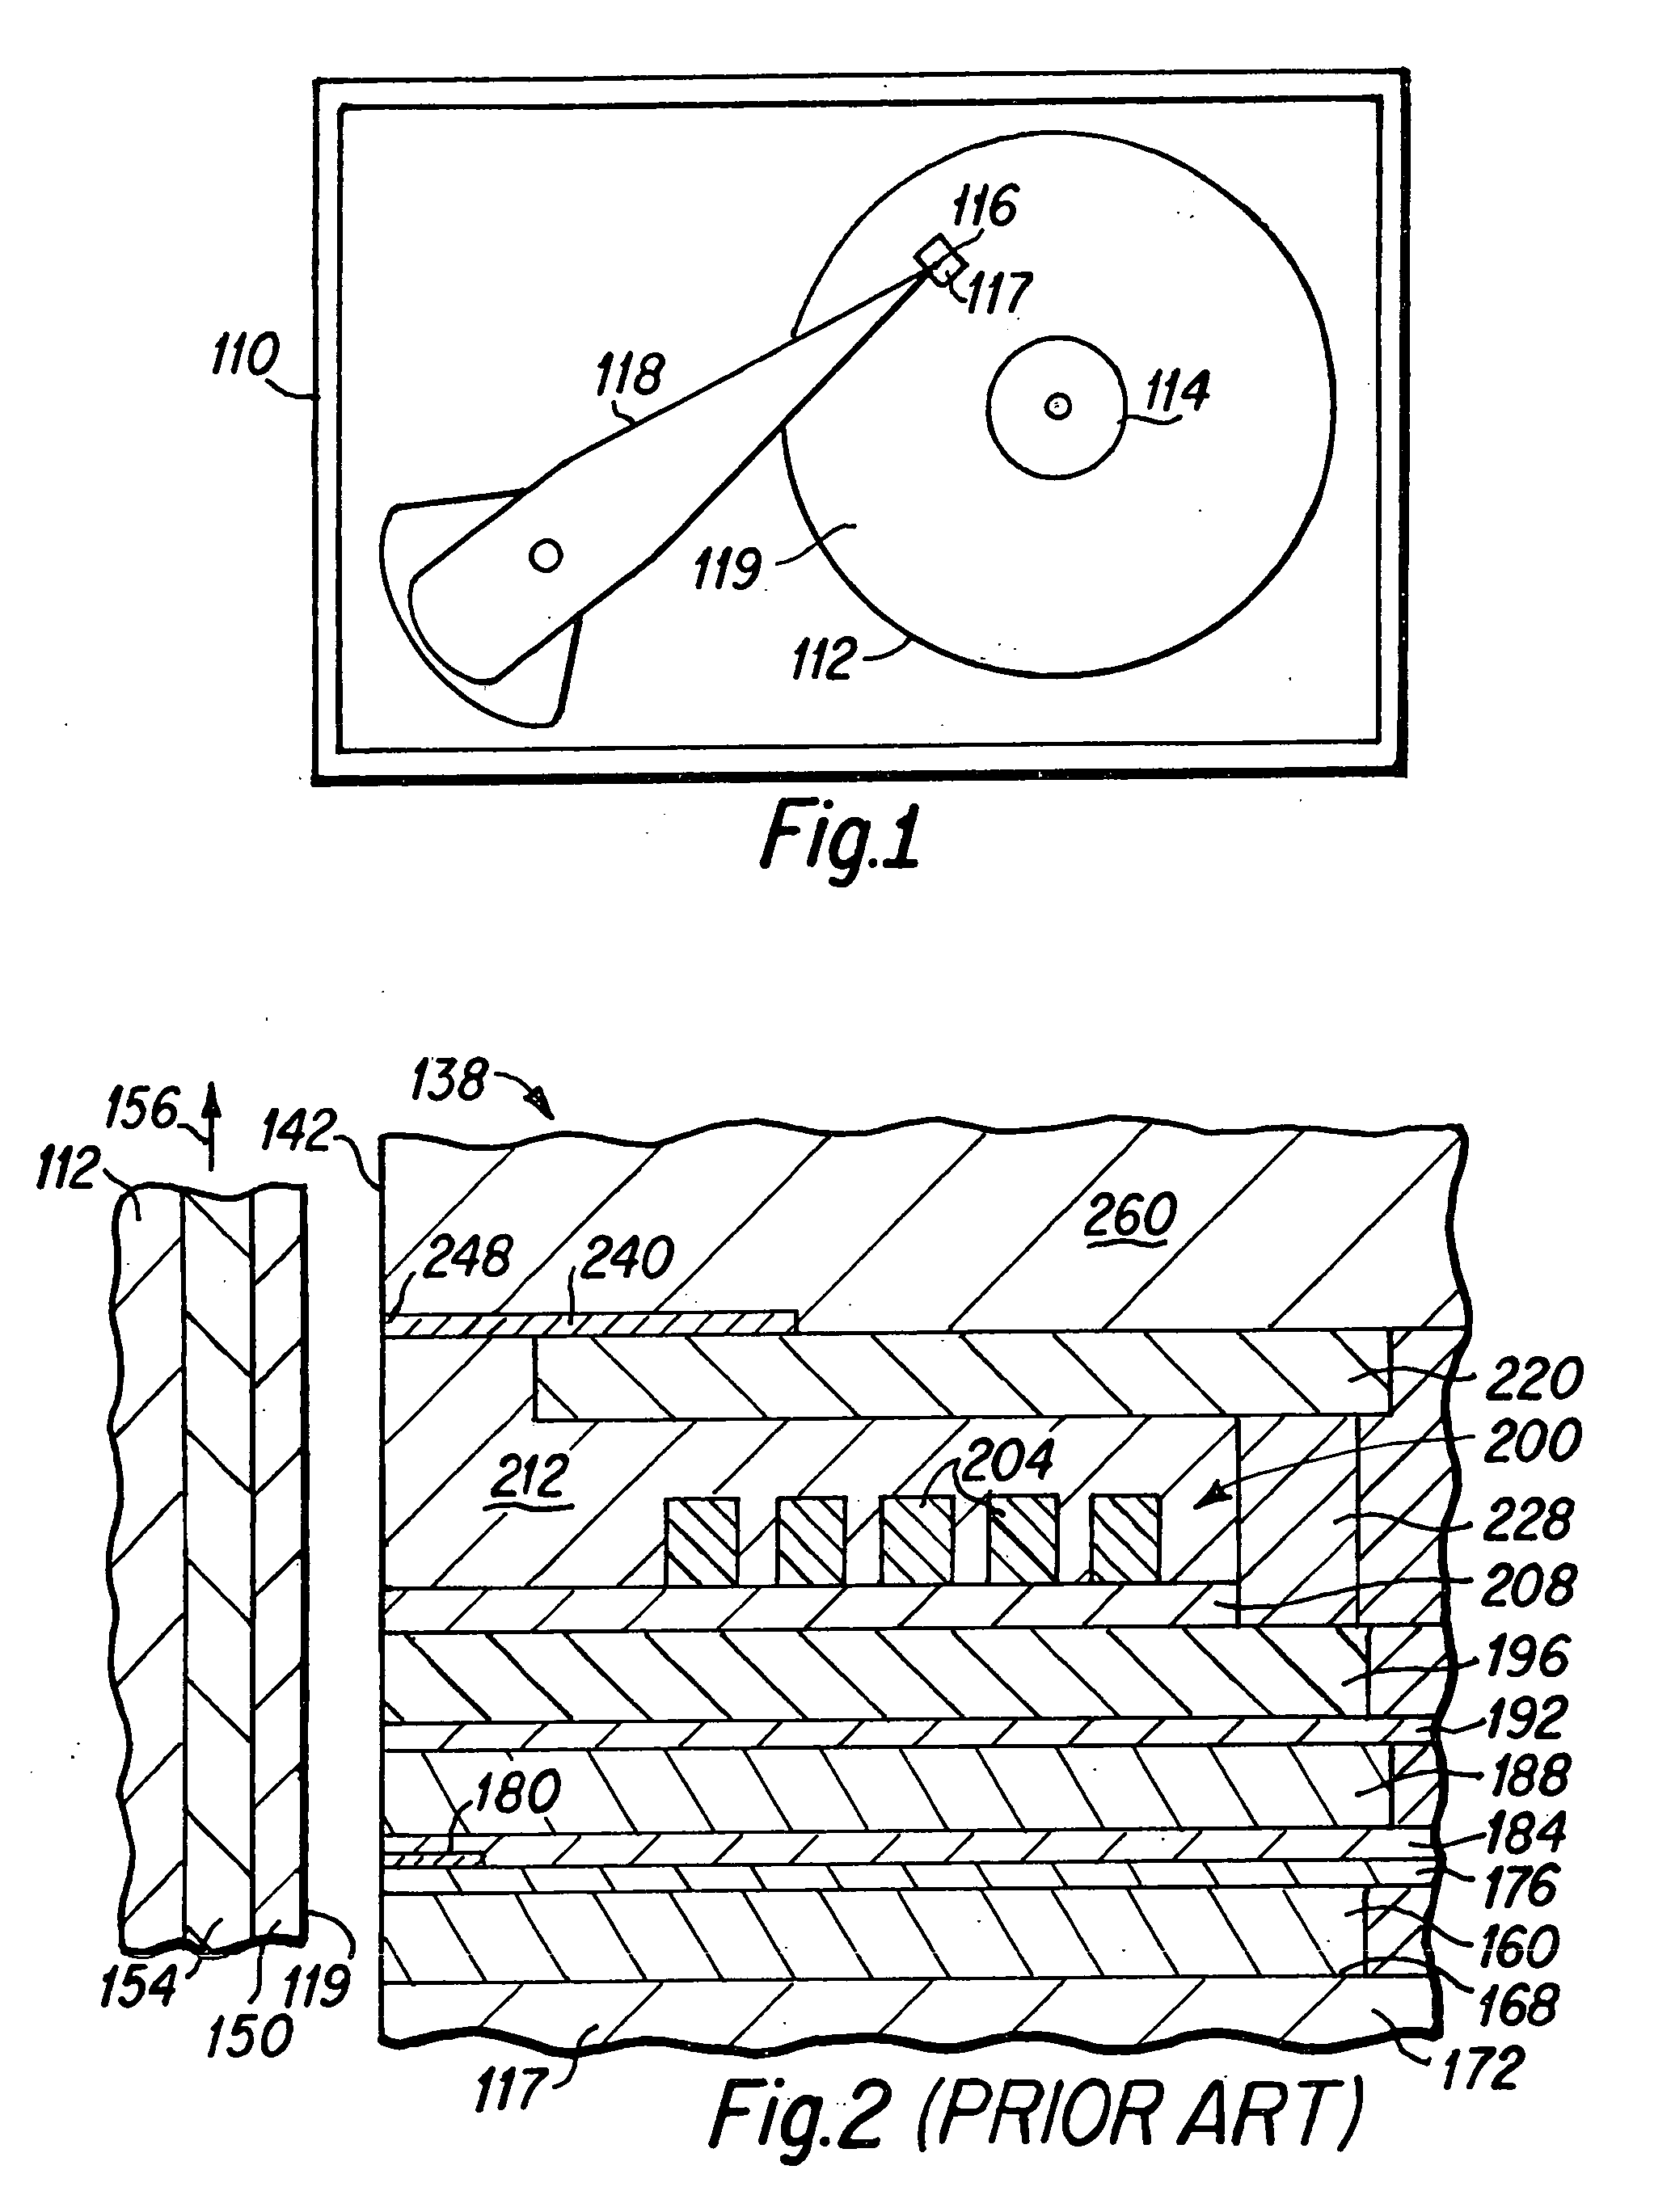 Thermally assisted recording of magnetic media using an optical resonant cavity and nano-pin power delivery device